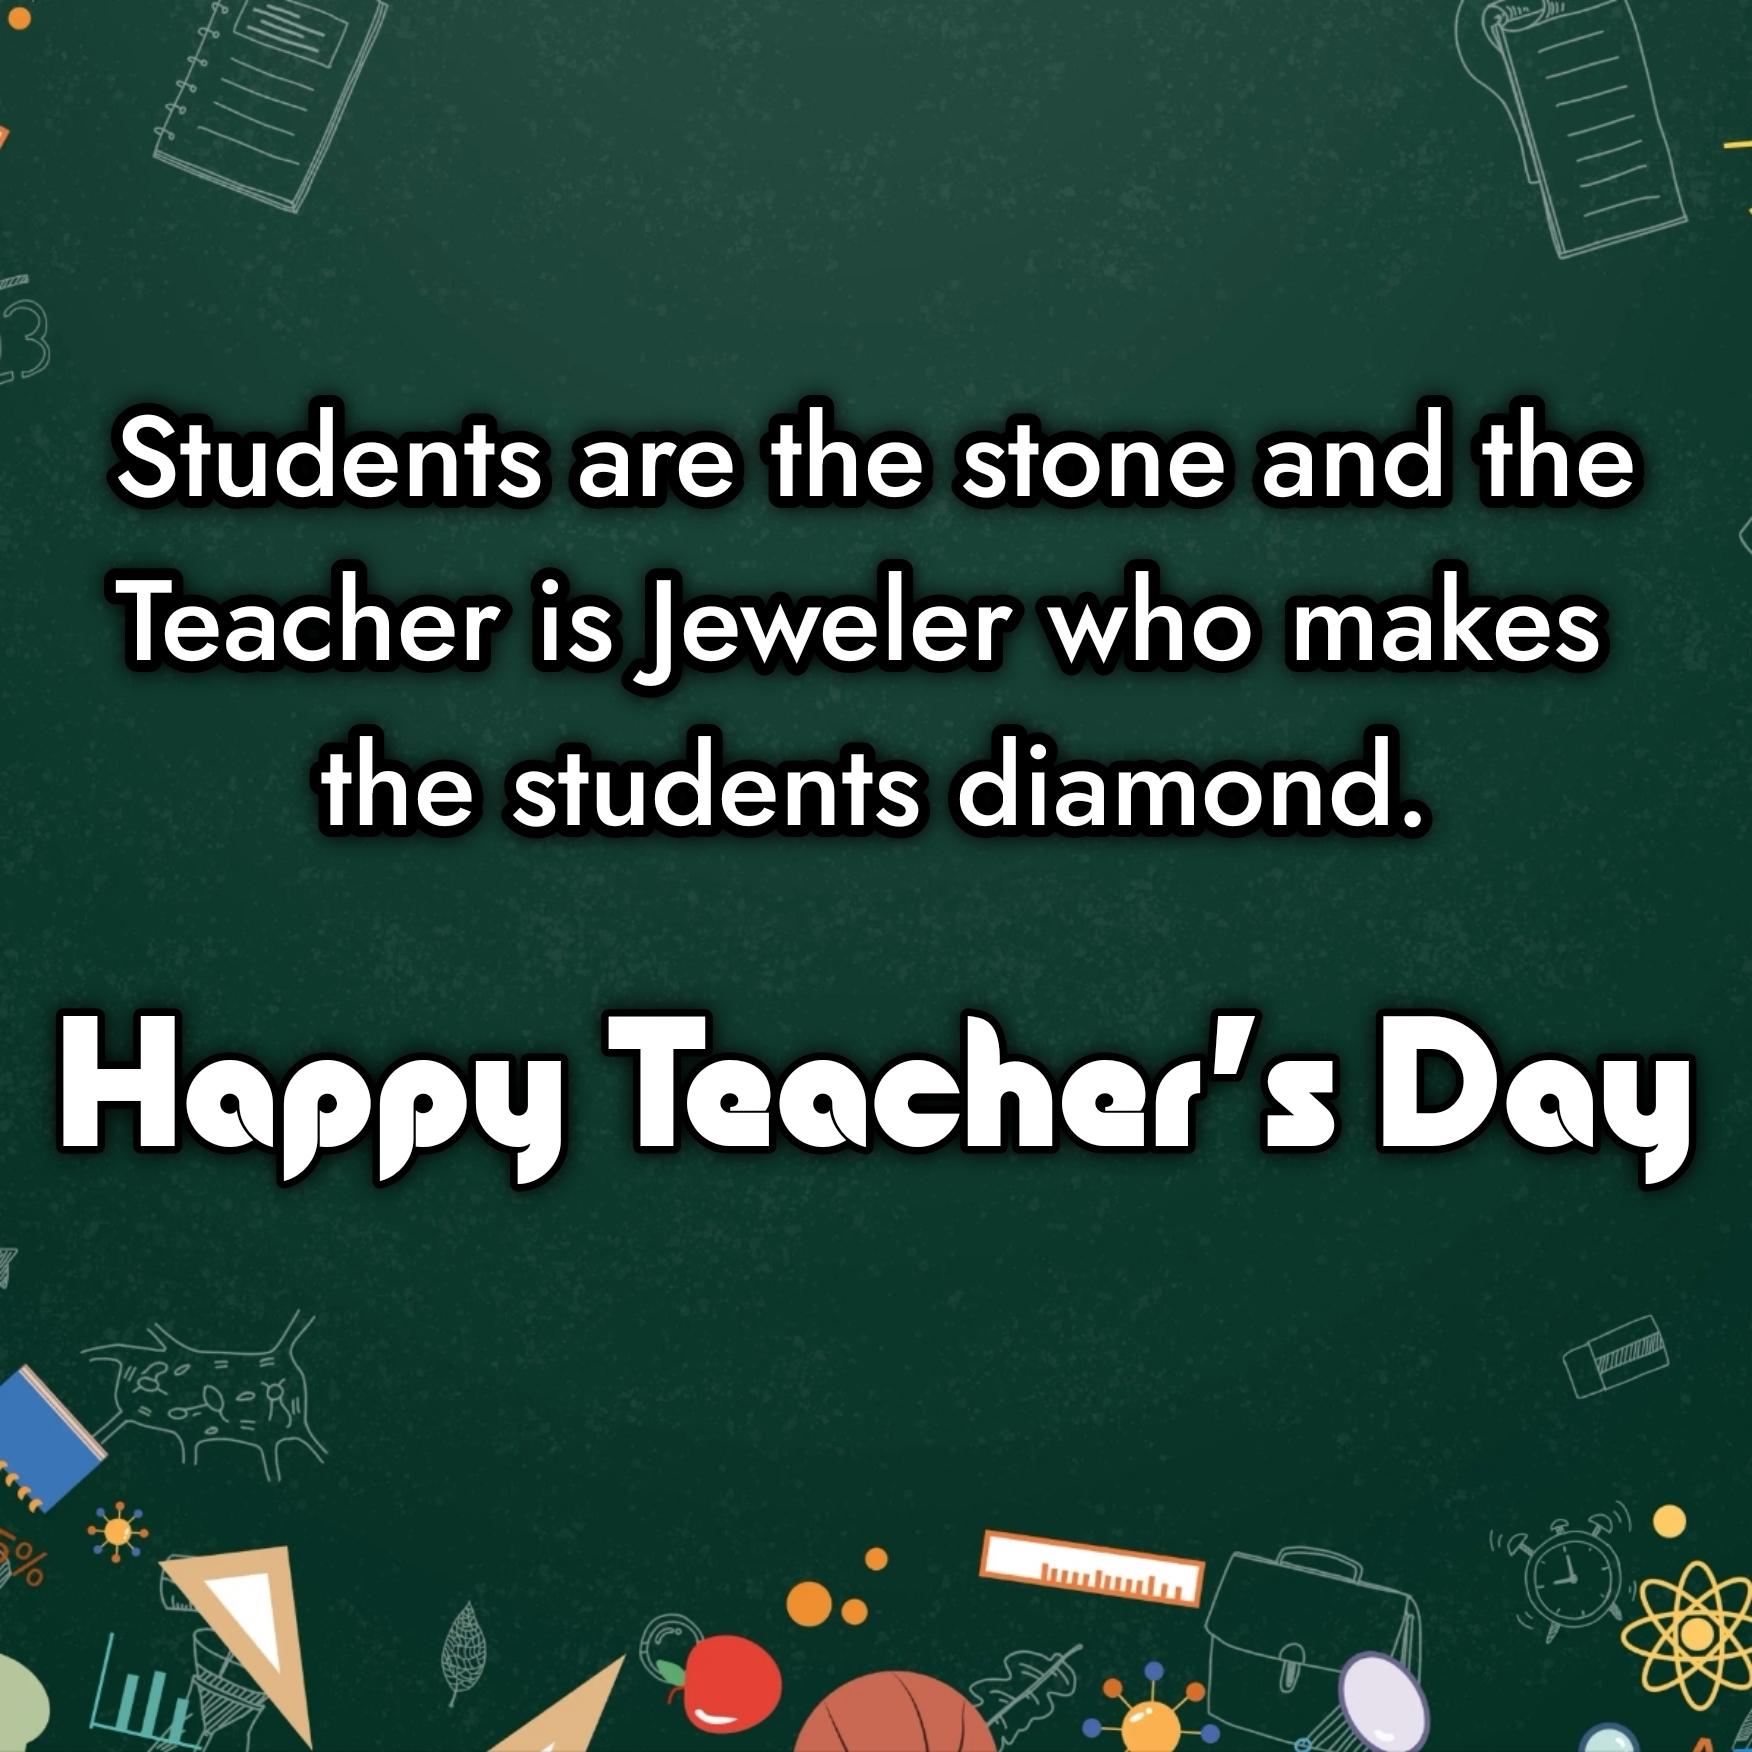 Students are the stone and the Teacher is Jeweler